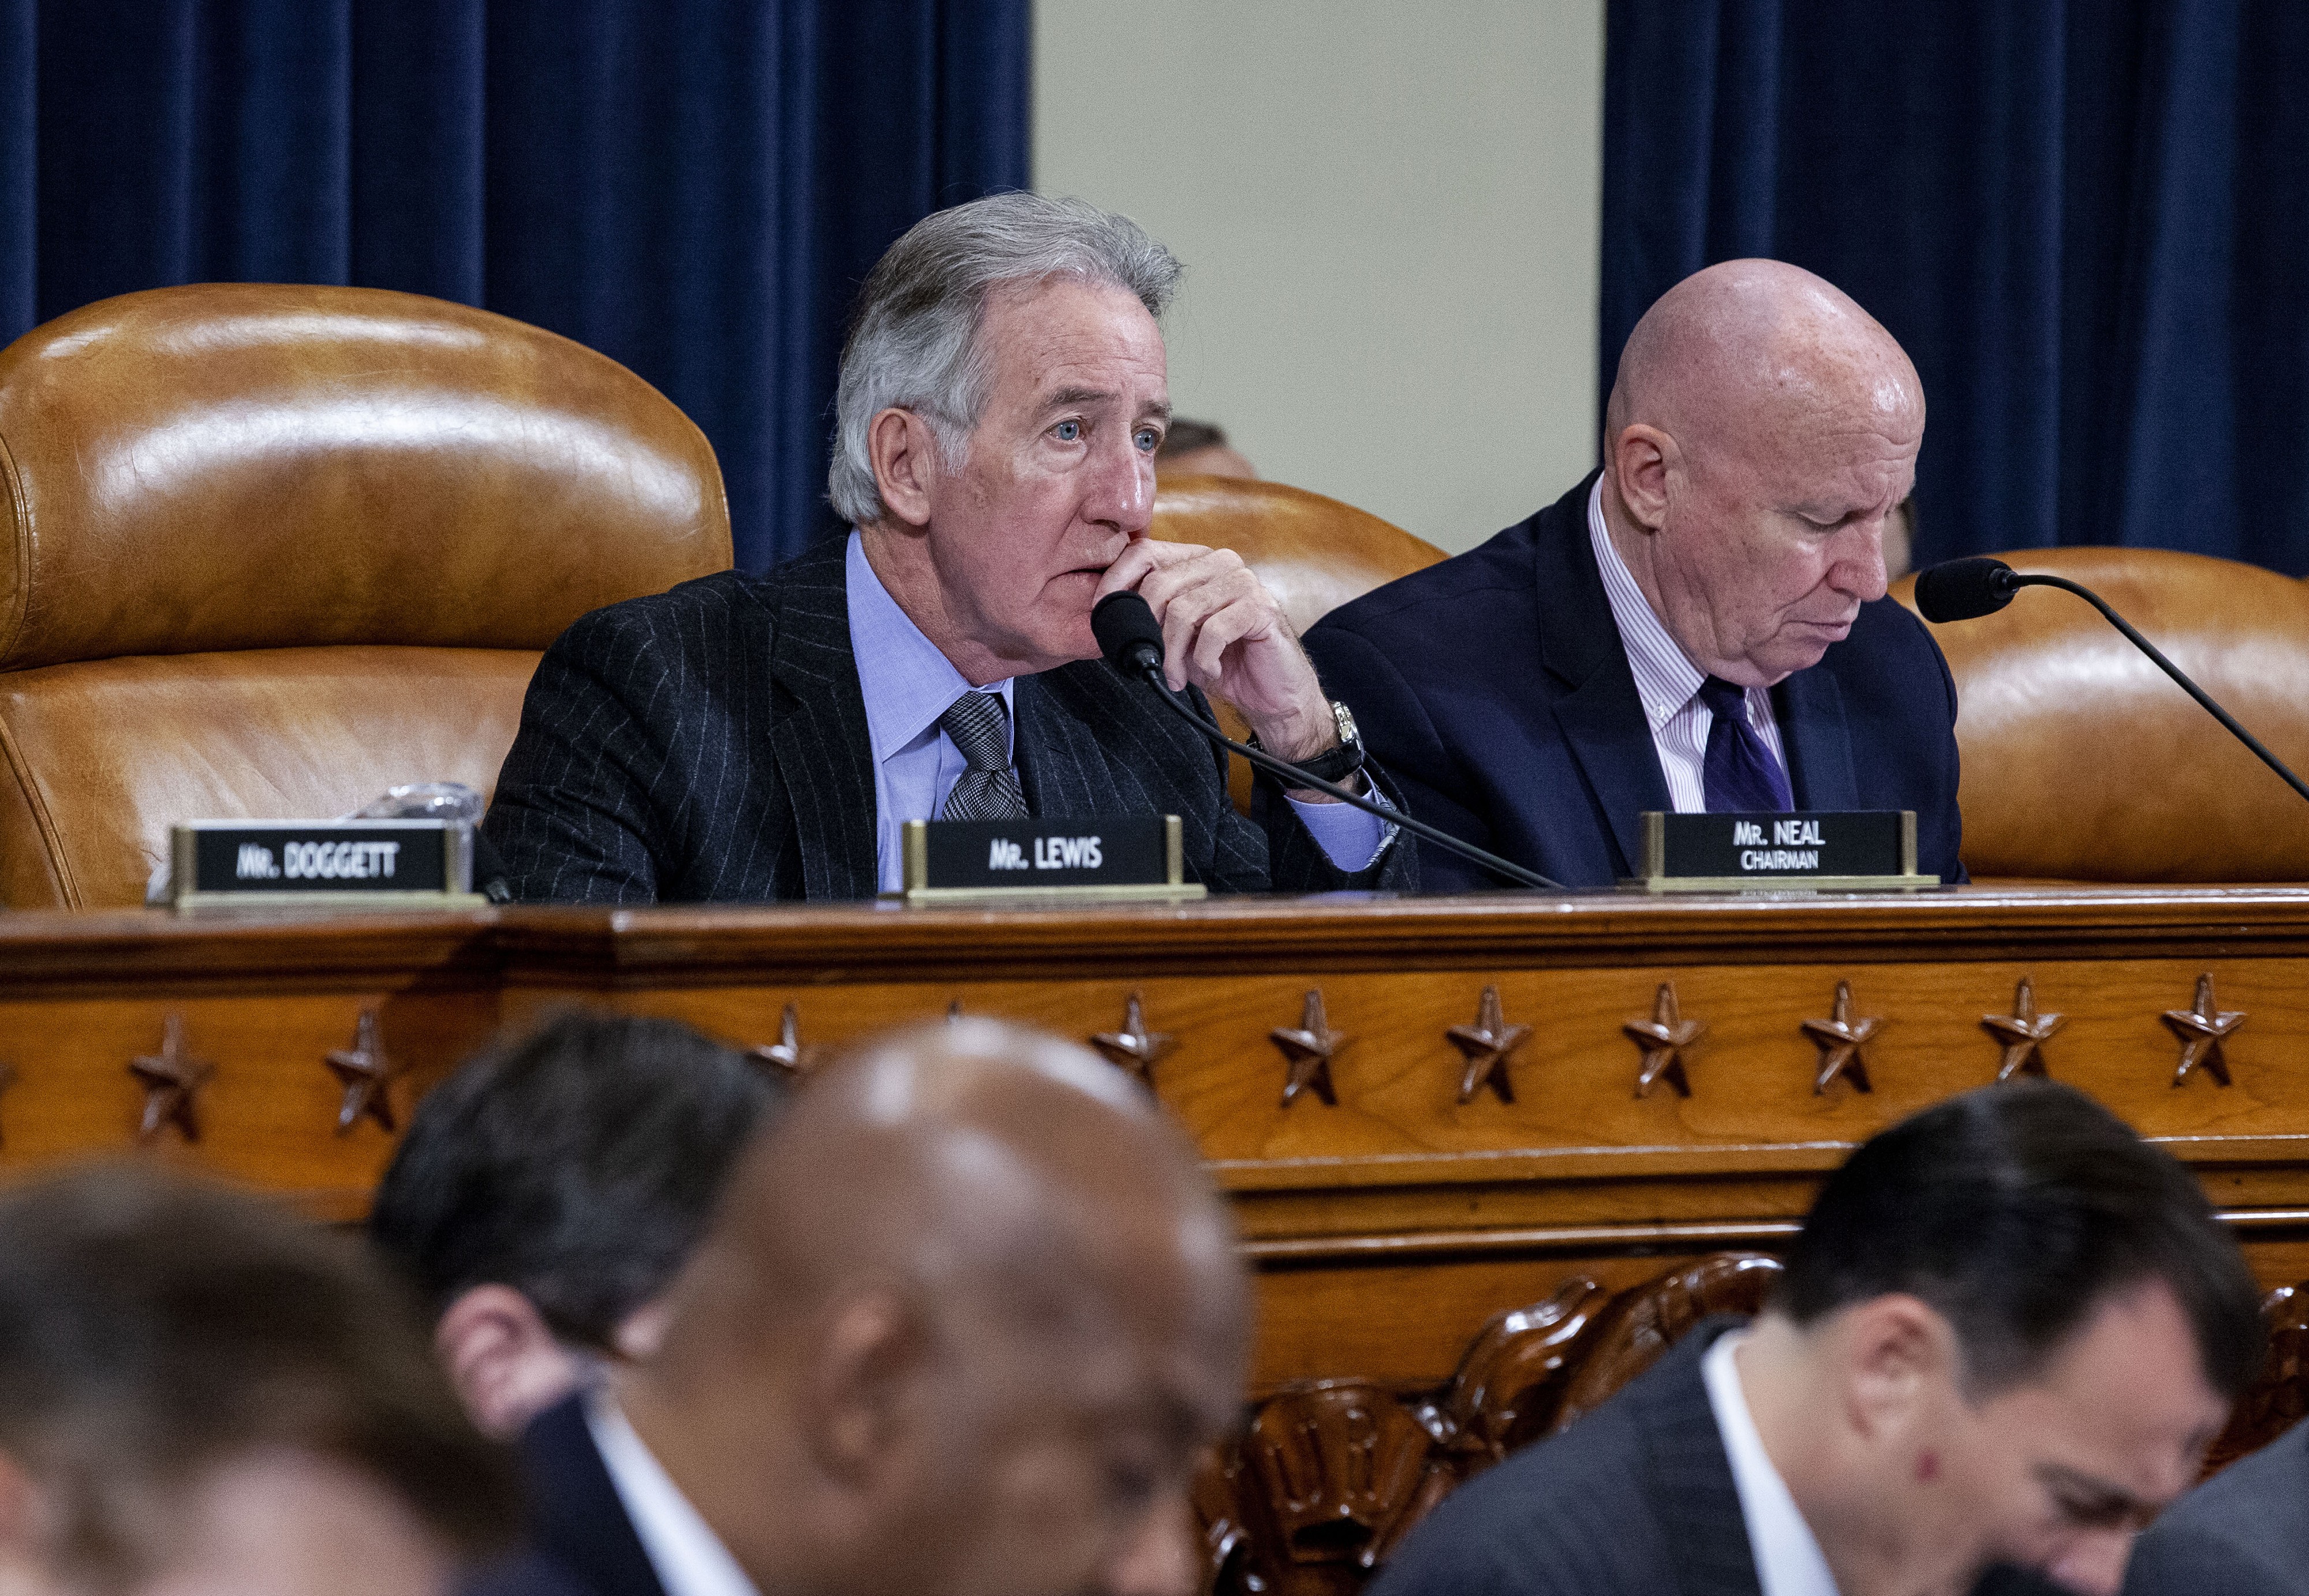 Democratic Representative Richard Neal (left), chairman of the House Ways and Means Committee, and Republican Representative Kevin Brady listen during a committee hearing. During testimony by US Trade Representative Robert Lighthizer, both Neal and Brady called for structural changes to the Chinese economy. Photo: Bloomberg